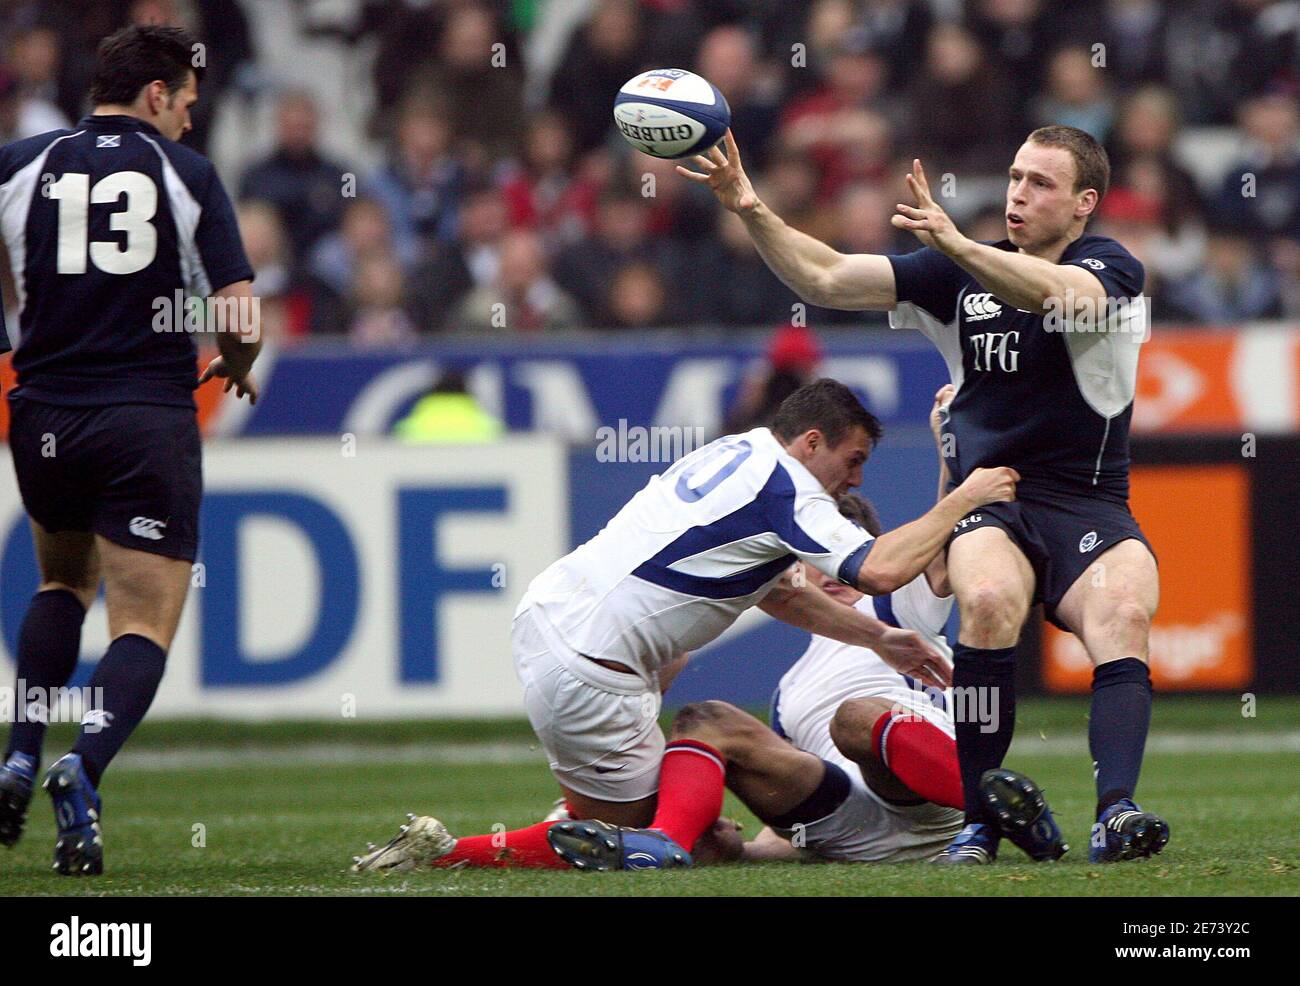 Scotland's Andrew Henderson and France's Lionel Beauxis during the Rugby Union RBS 6 nations tournament match France vs Scotland at the Stade de France in Saint-Denis, north of Paris, France, on March 17, 2007. France won 46-19. Photo by Mehdi Taamallah/Cameleon/ABACAPRESS.COM Stock Photo